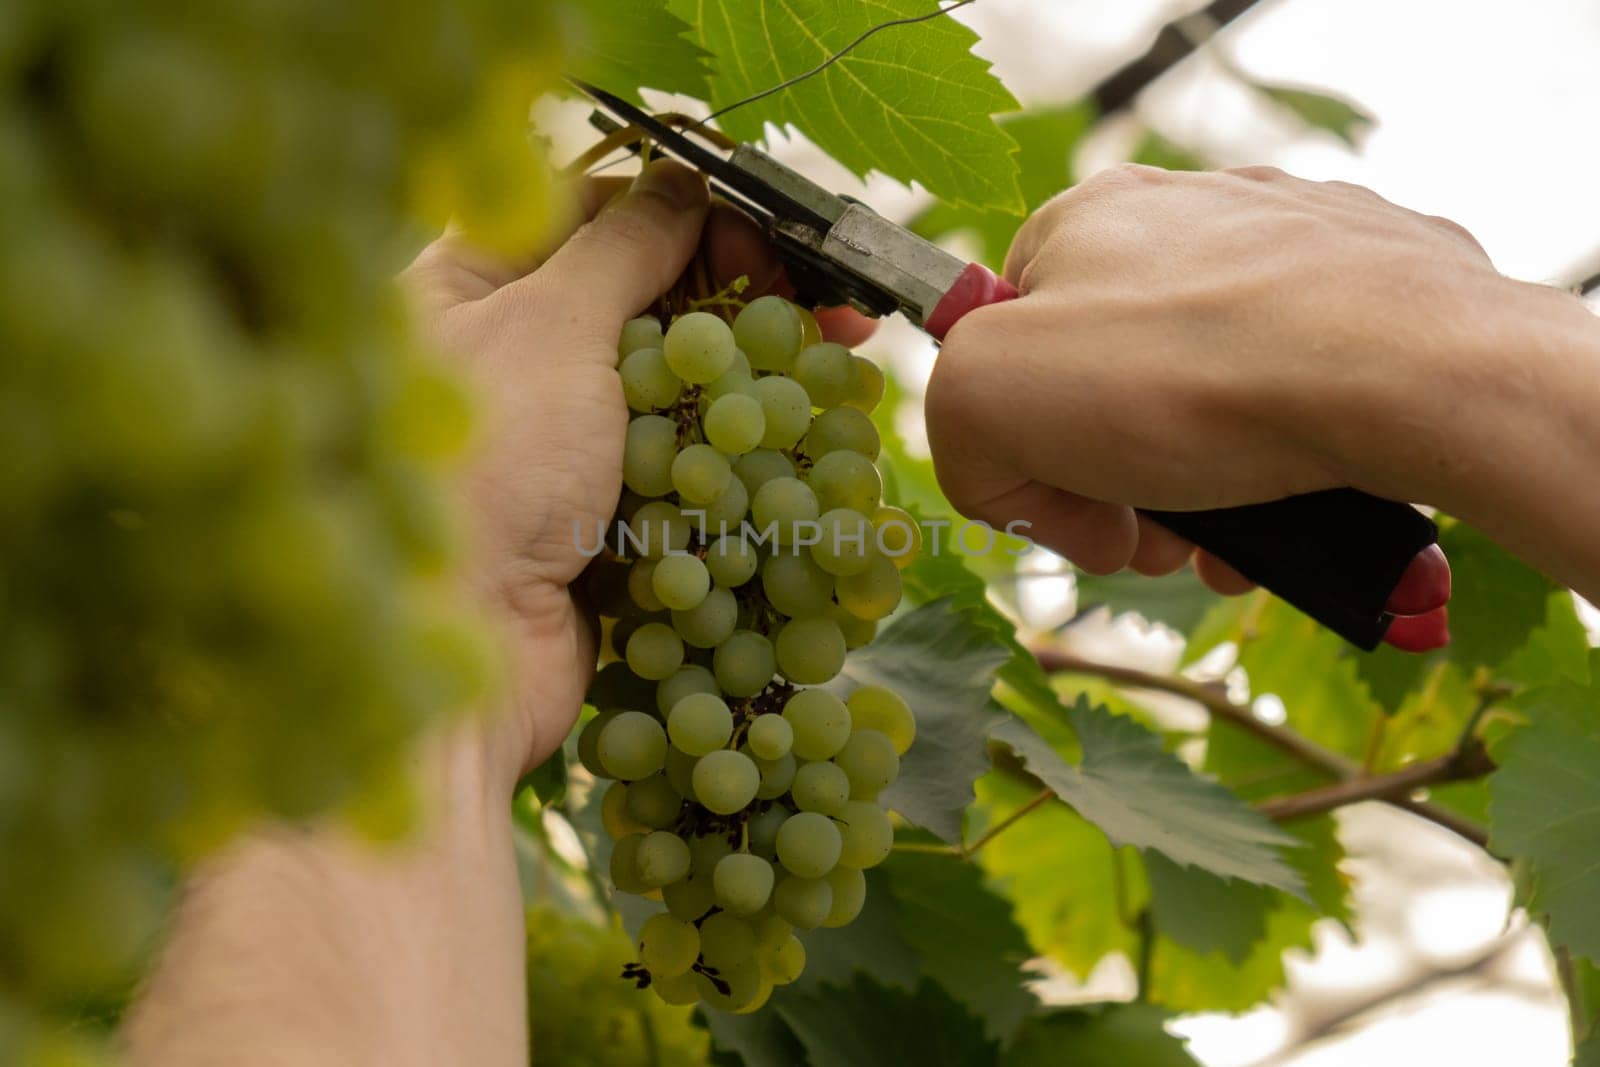 Farm worker harvesting green grapes in outdoor vineyards. Concept of healthy eating homegrown greenery fruits. Seasonal countryside cottage core life. Winemaker Farm produce